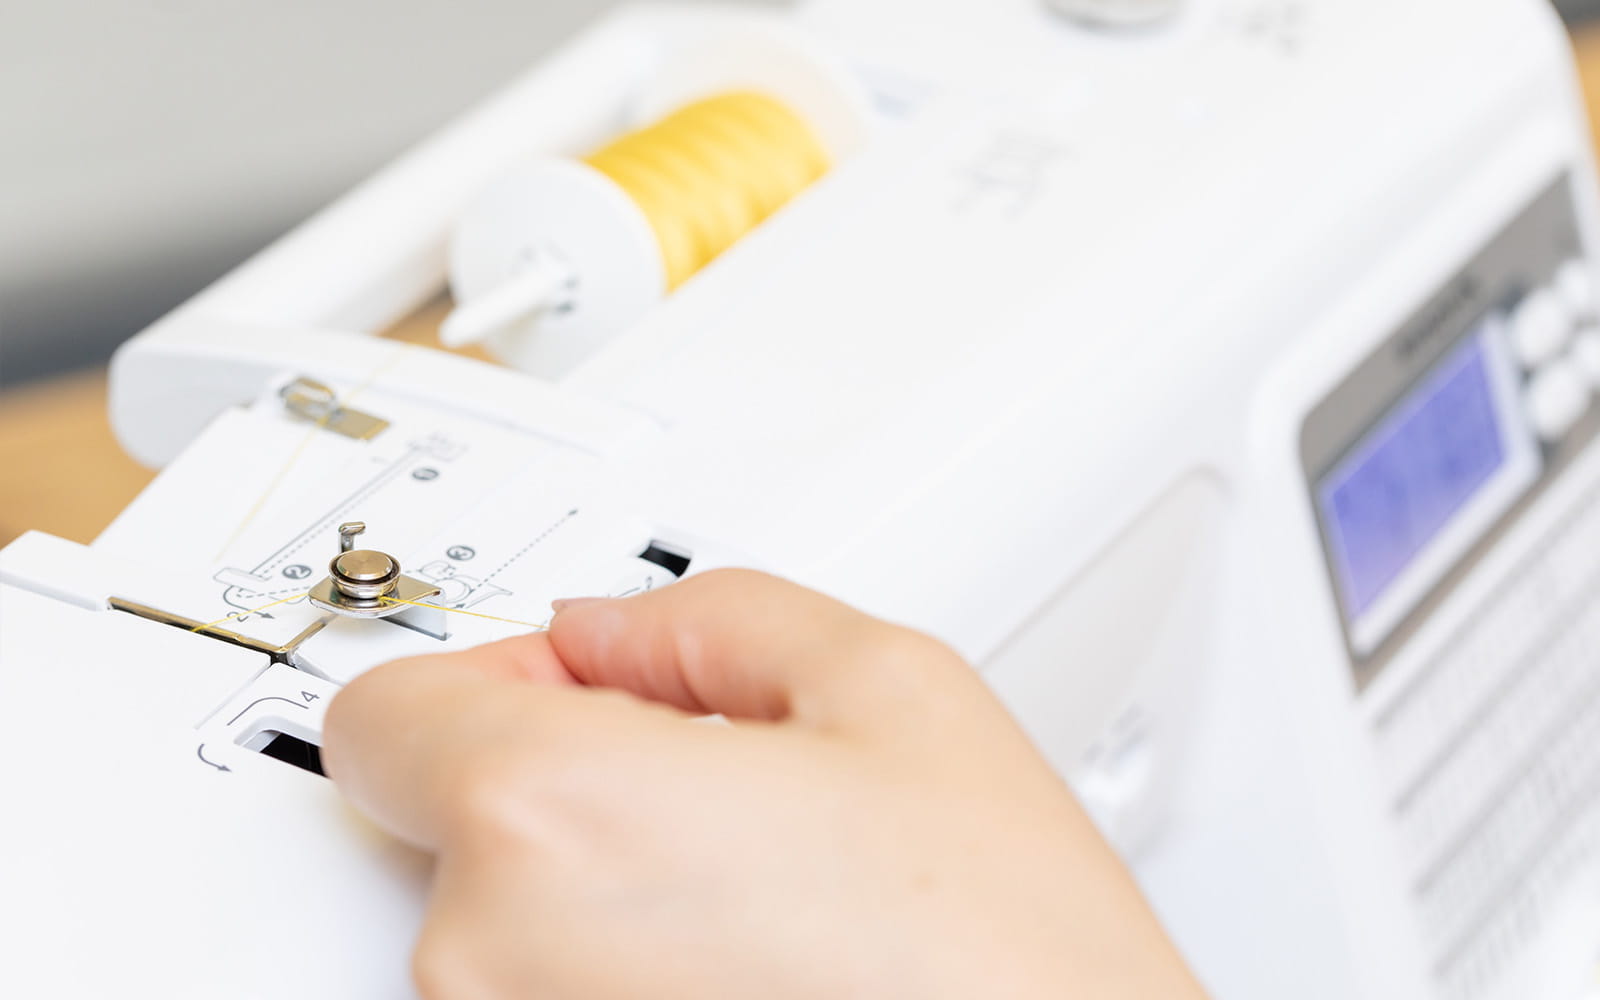 hand threading Brother sewing machine with yellow thread